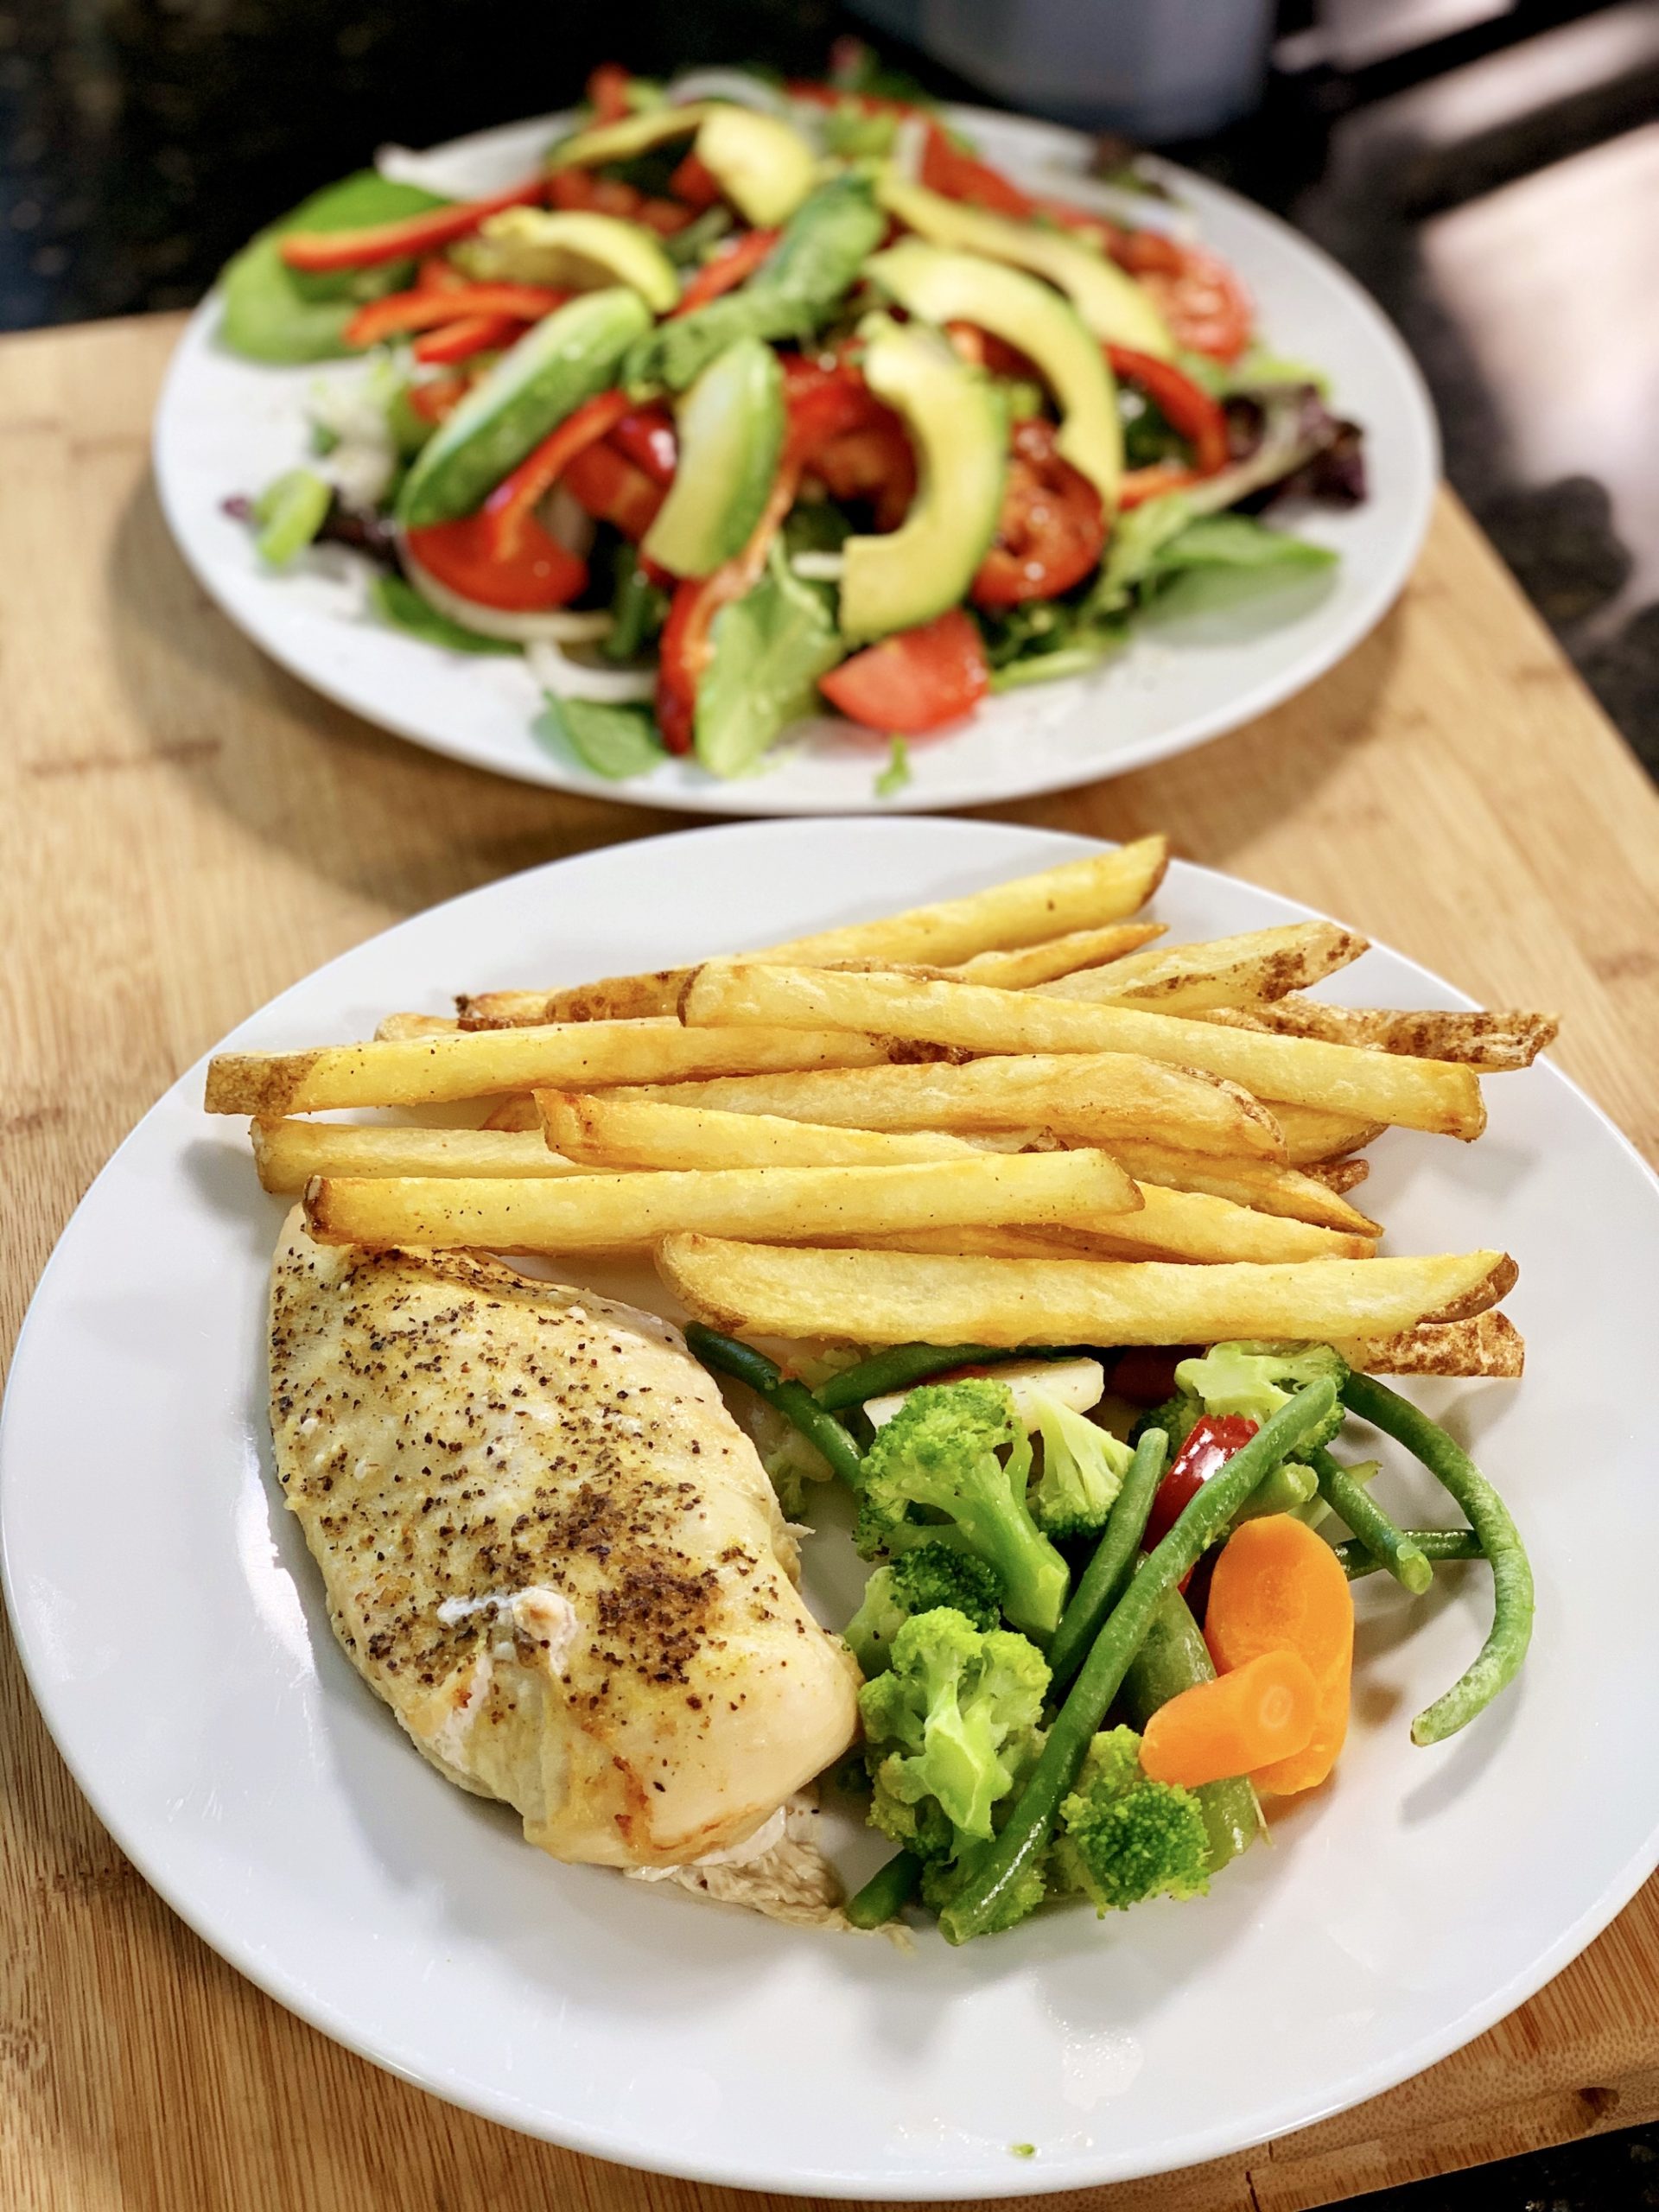 roof look puberty Roasted Chicken Breasts with Vegetables, French Fries and Green Salad -  cooking with chef bryan